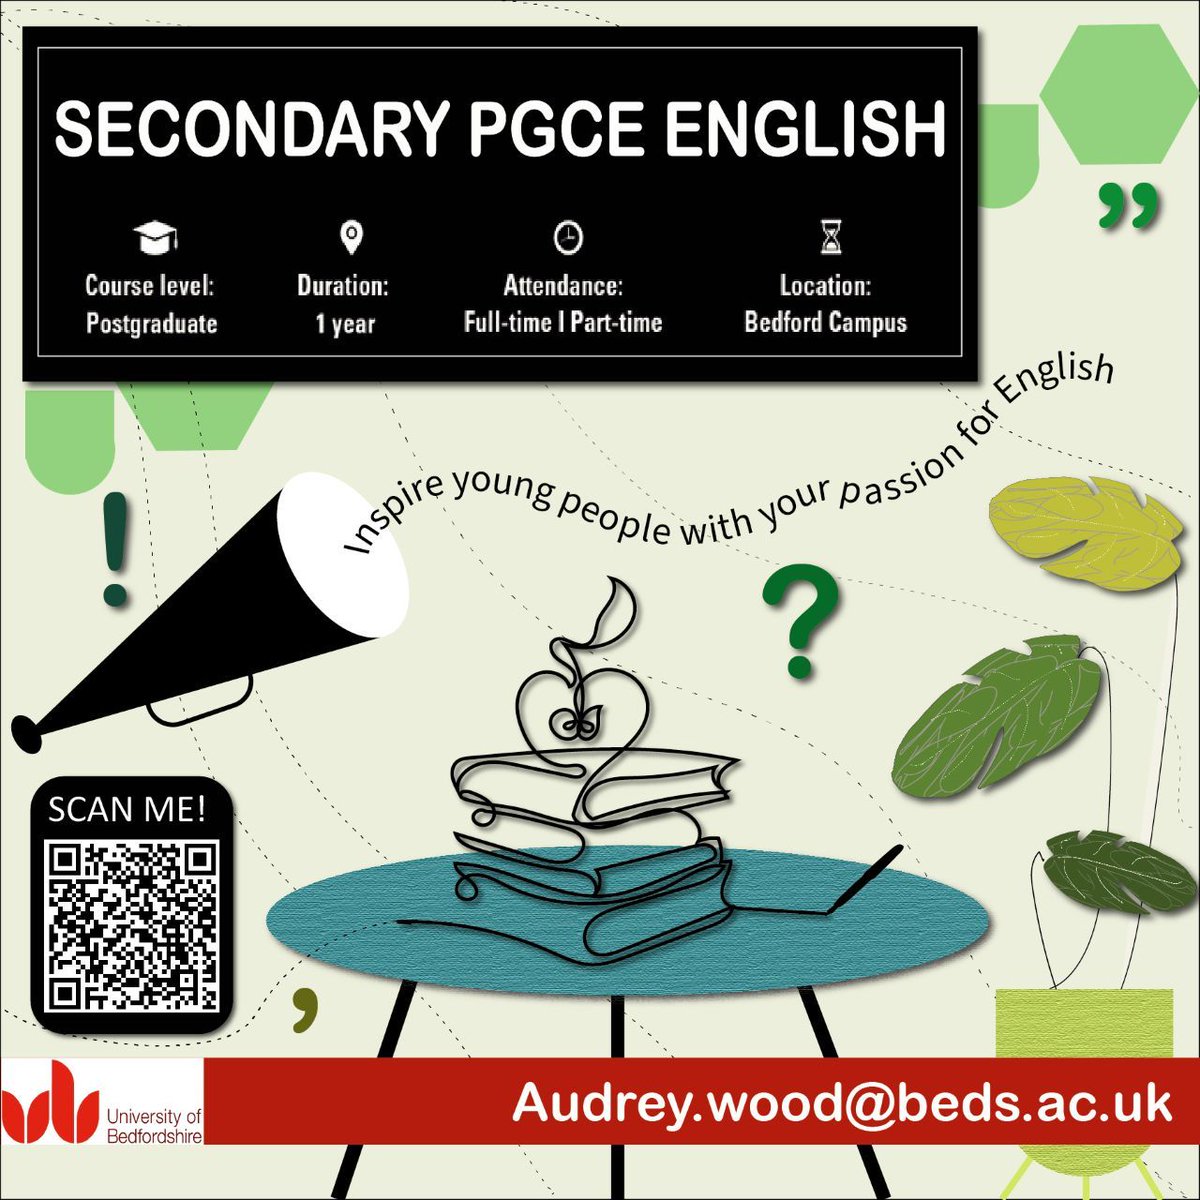 If you or anyone you know would like to become a secondary English teacher get in touch to find out more about our award winning PGCE at the University of Bedfordshire. #PGCE #edutwitter #secondary #Traintoteach #bedford #luton #miltonkeynes #graduates #PGCE #Northanmpton